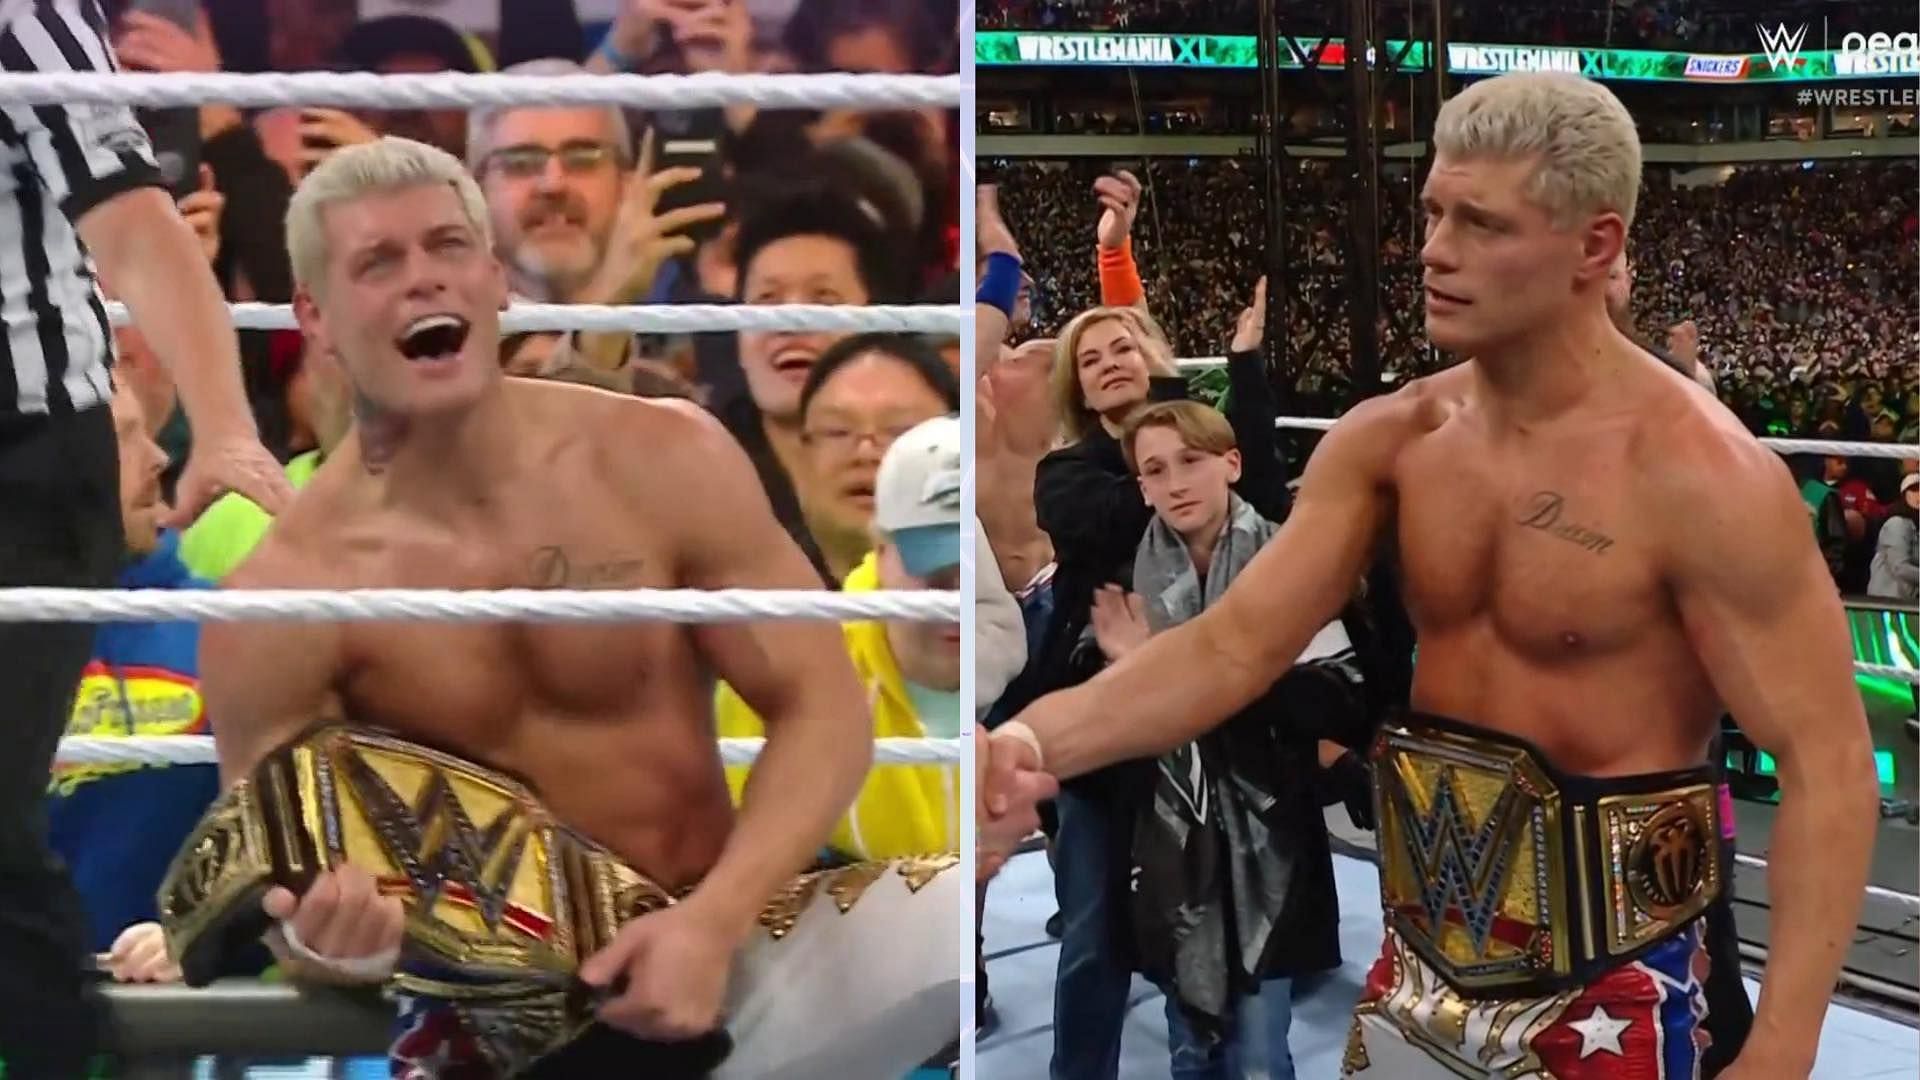 Cody Rhodes is the new Undisputed WWE Universal Champion